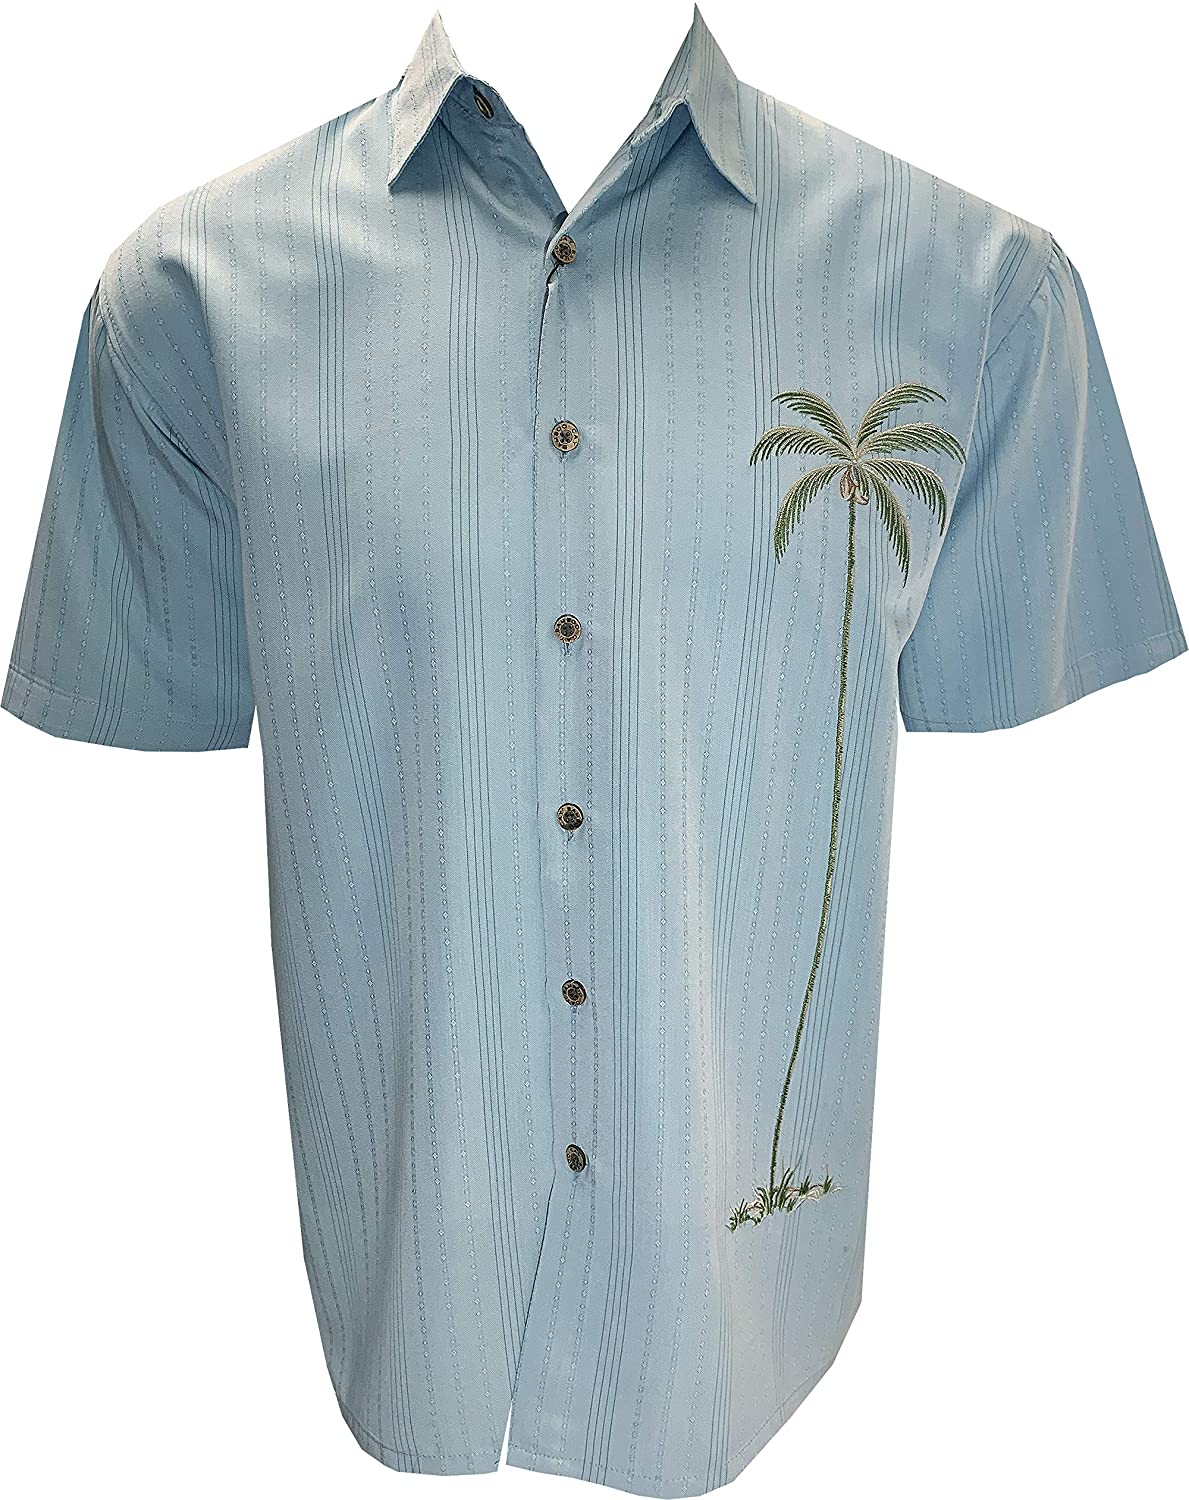 Bamboo Cay Mens Short Sleeve Single Palm Casual Embroidered Woven Shirt